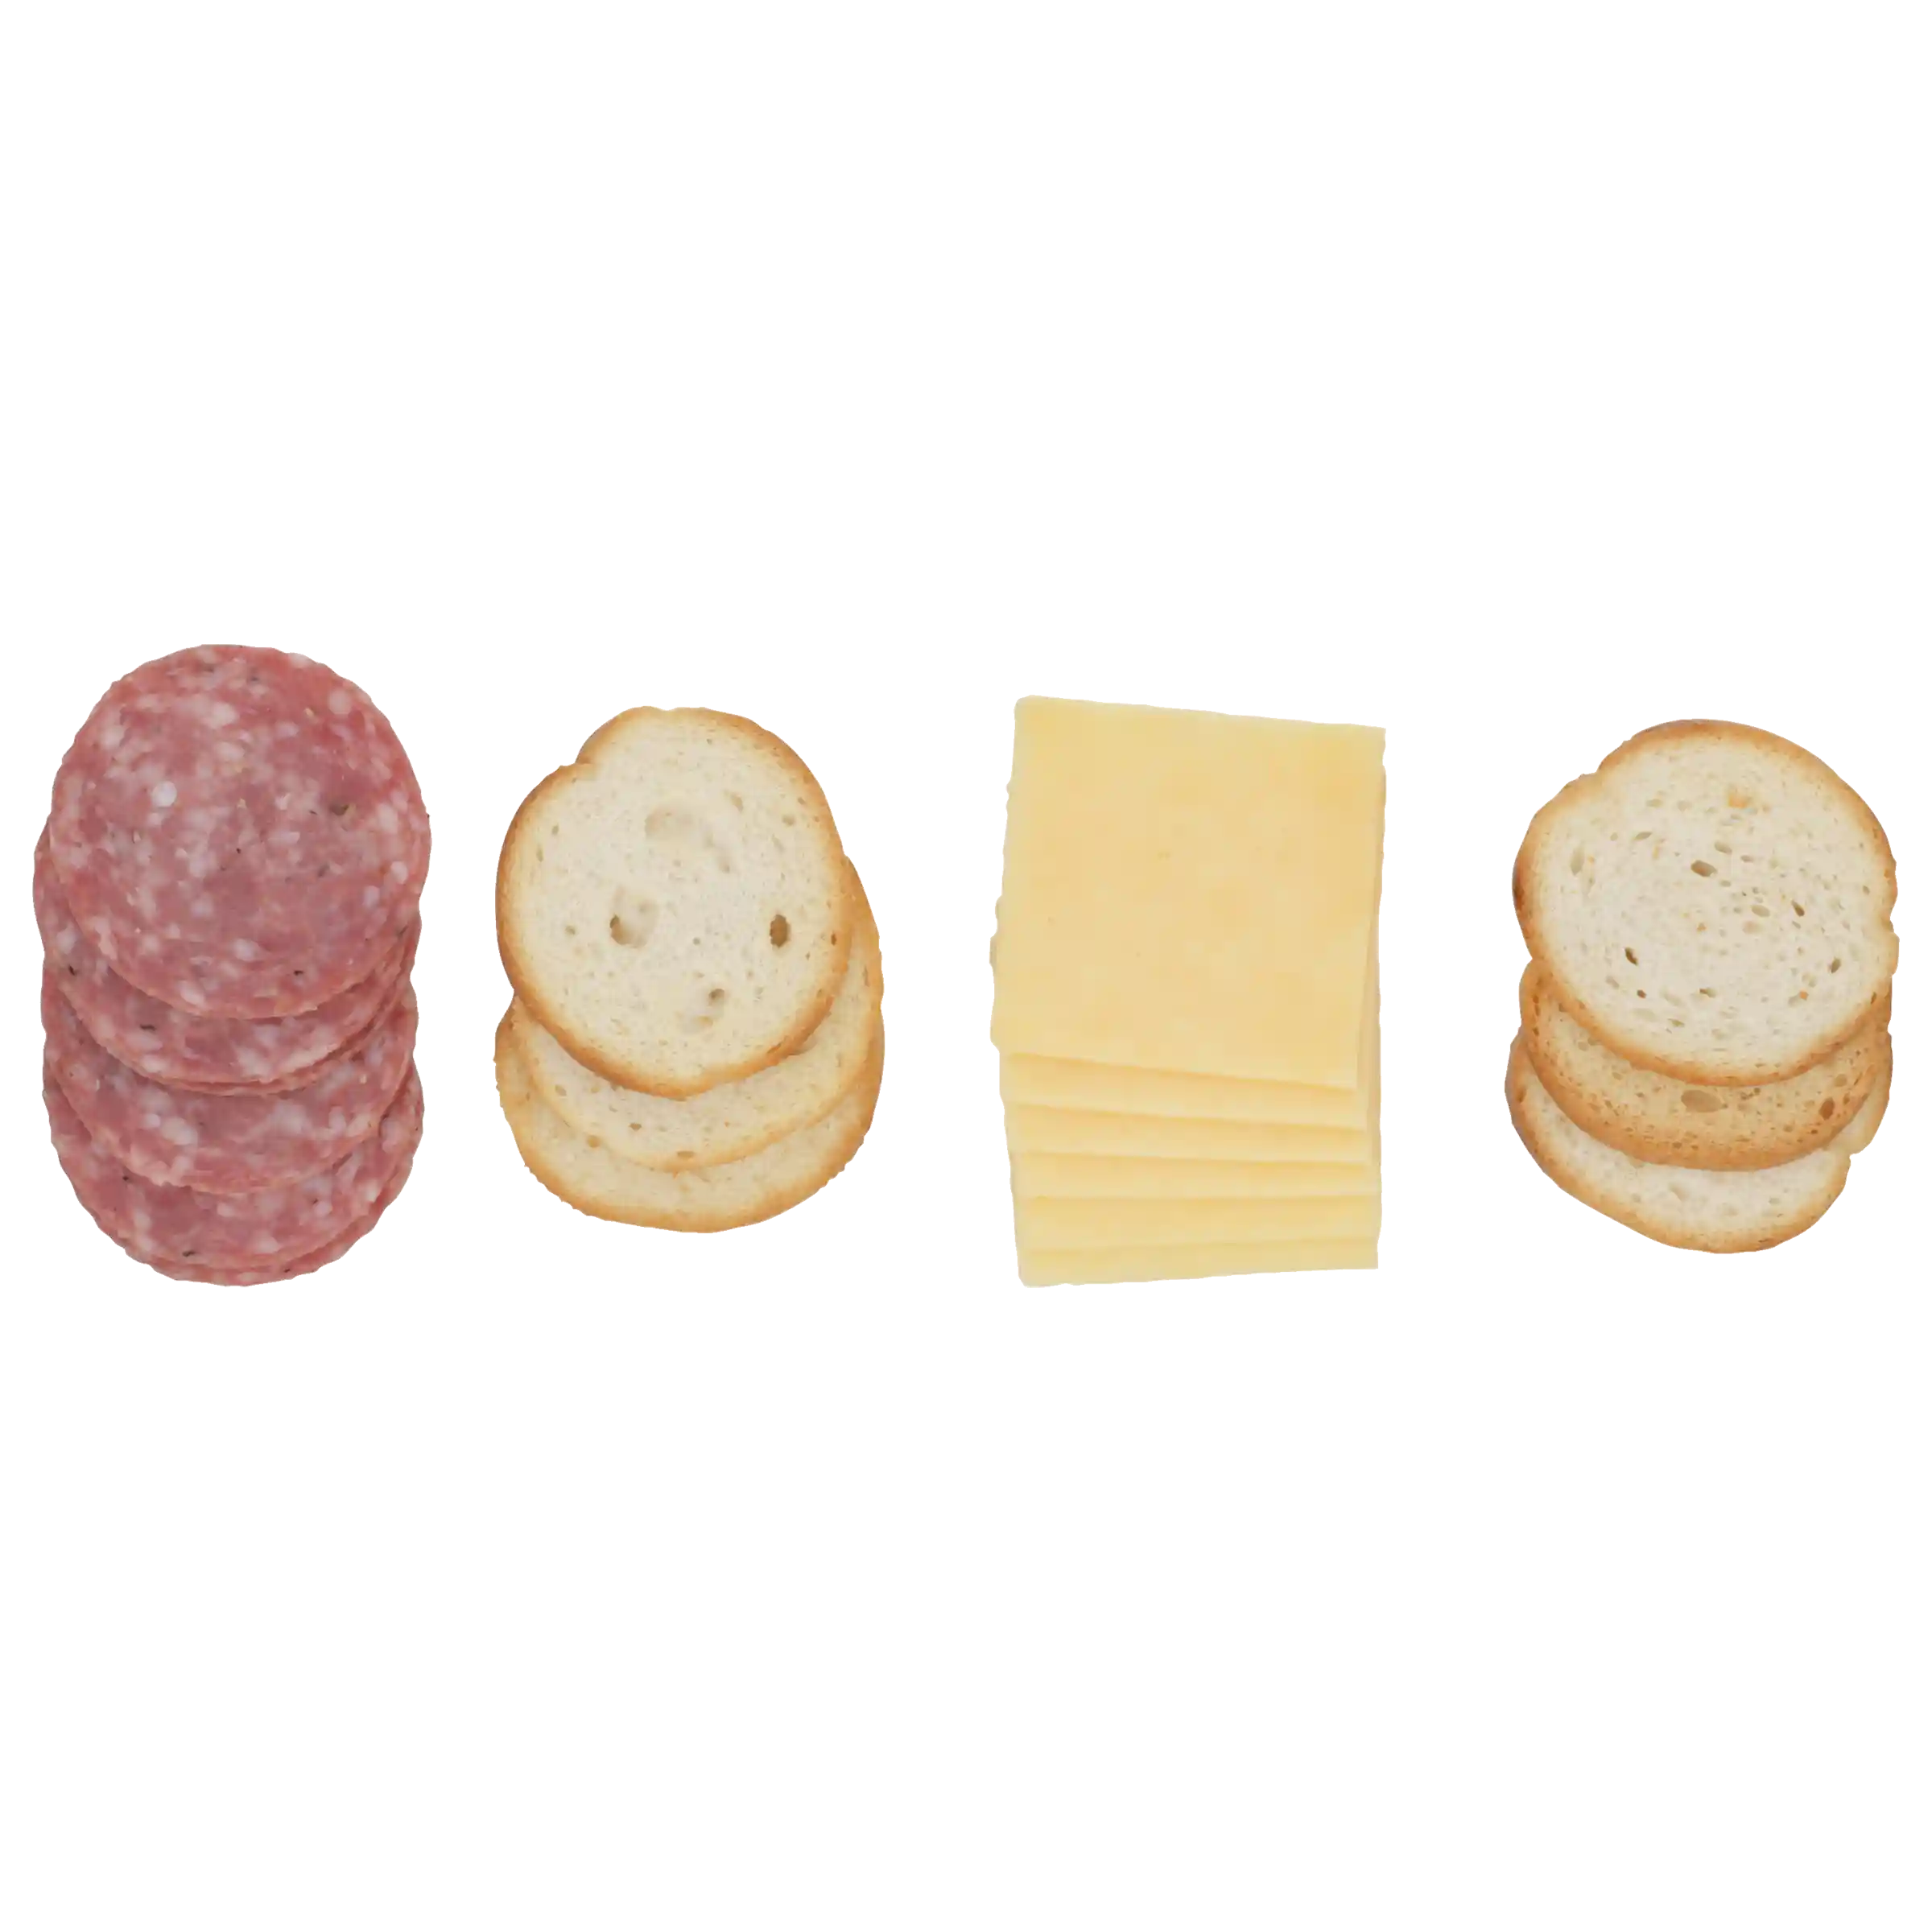 Hillshire® Snacking Small Plates, Italian Dry Salame Deli Lunch Meat and Gouda Cheese, 2.76 ozhttps://images.salsify.com/image/upload/s--Vosmn6tR--/q_25/eso3ukdox3otwn8hxgr9.webp